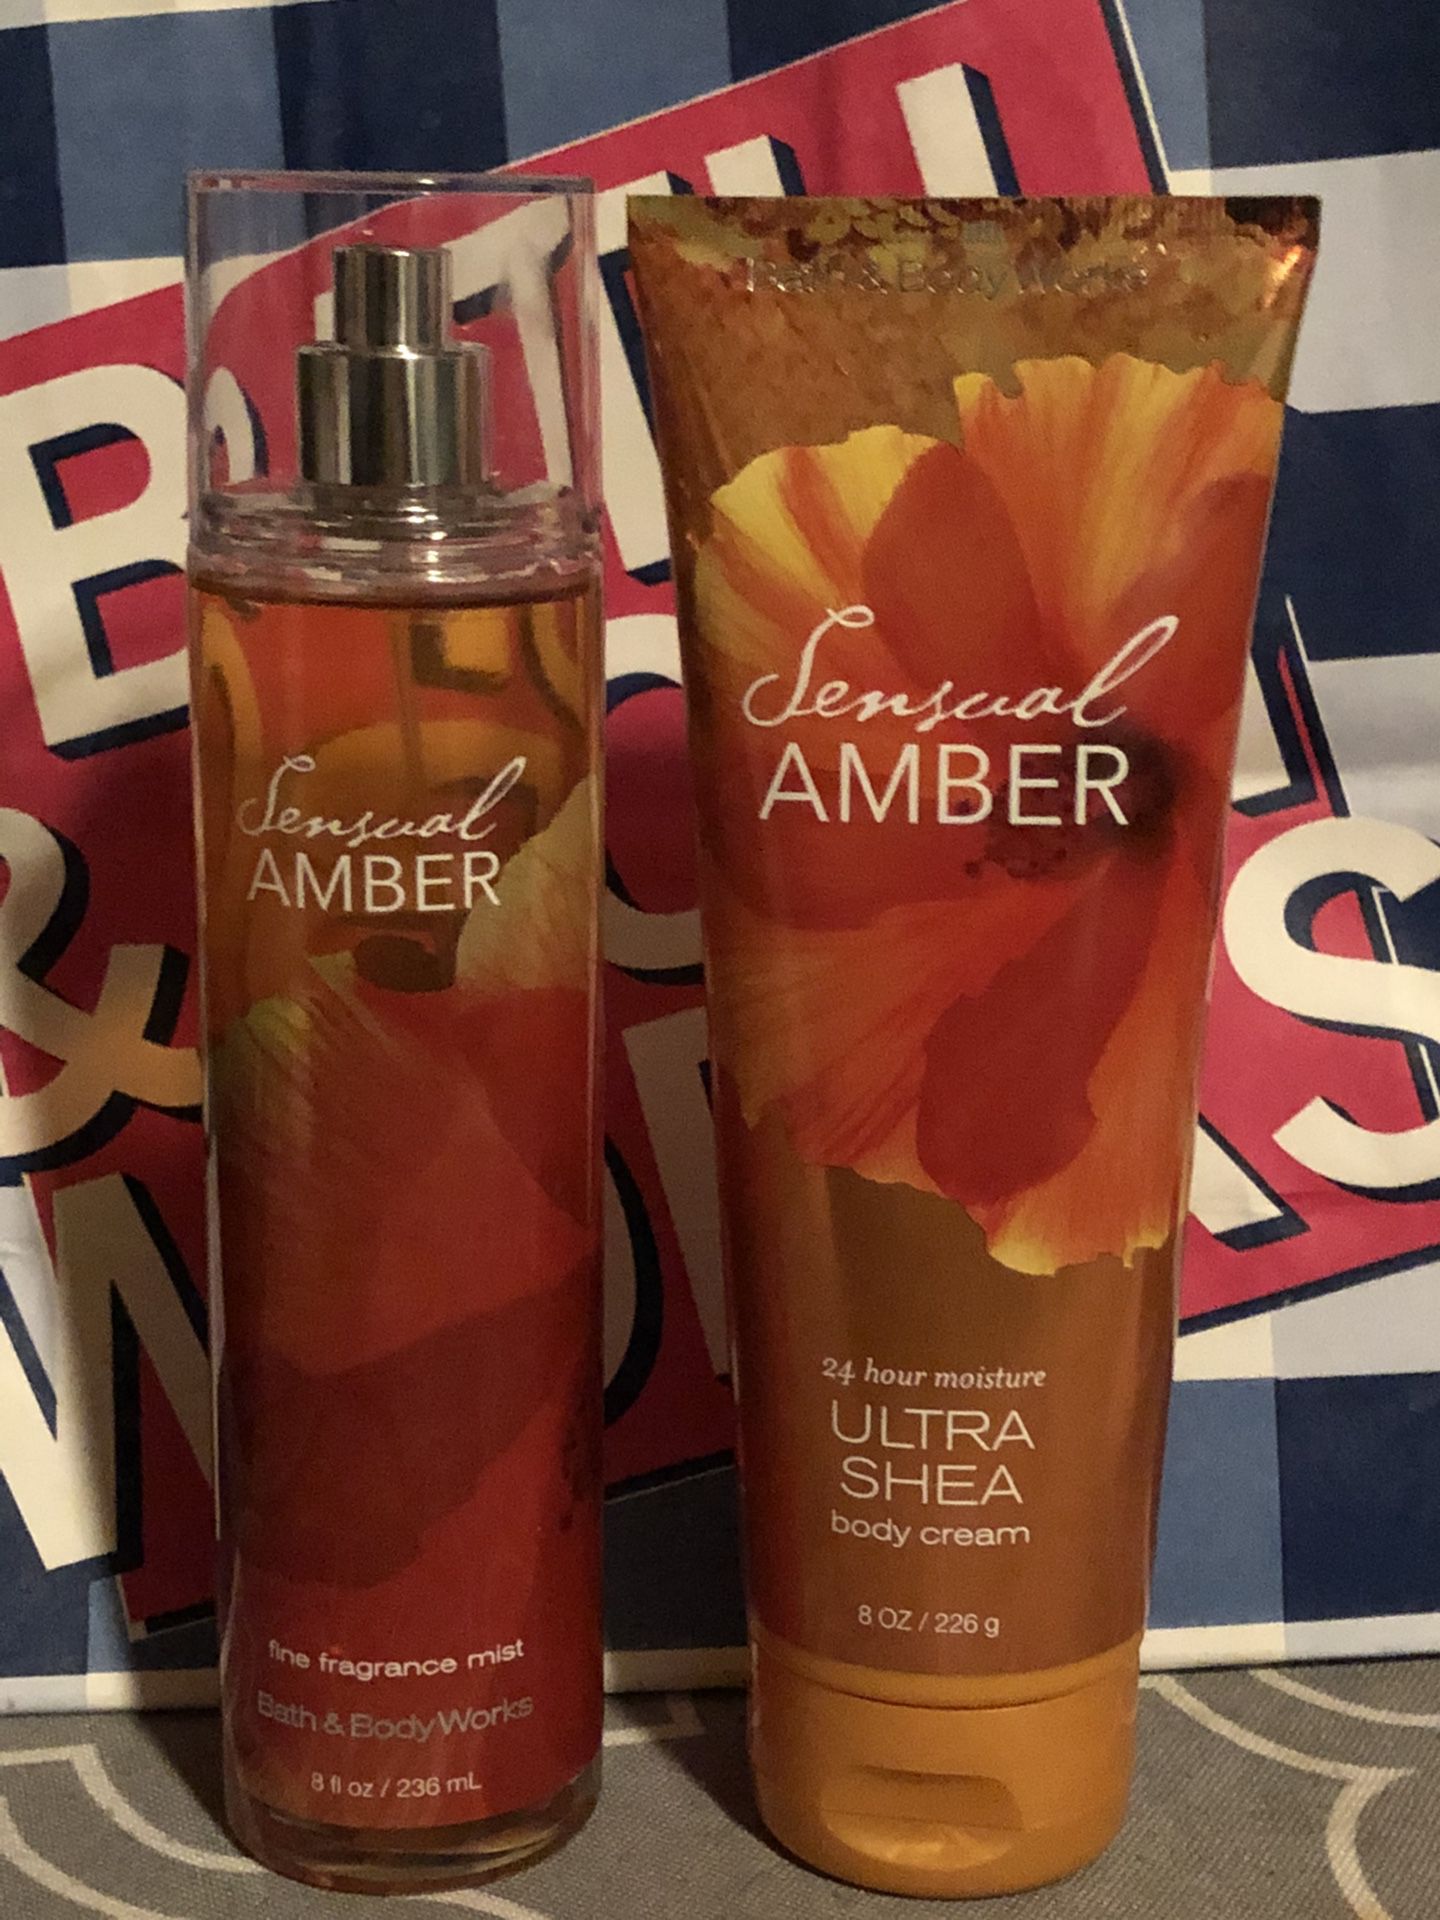 Sensual Amber Fine Fragrance Mist and Ultra Shea Body Cream. By Bath And Body Works. Sold As A Set. $9.50. Please See Description For Details.